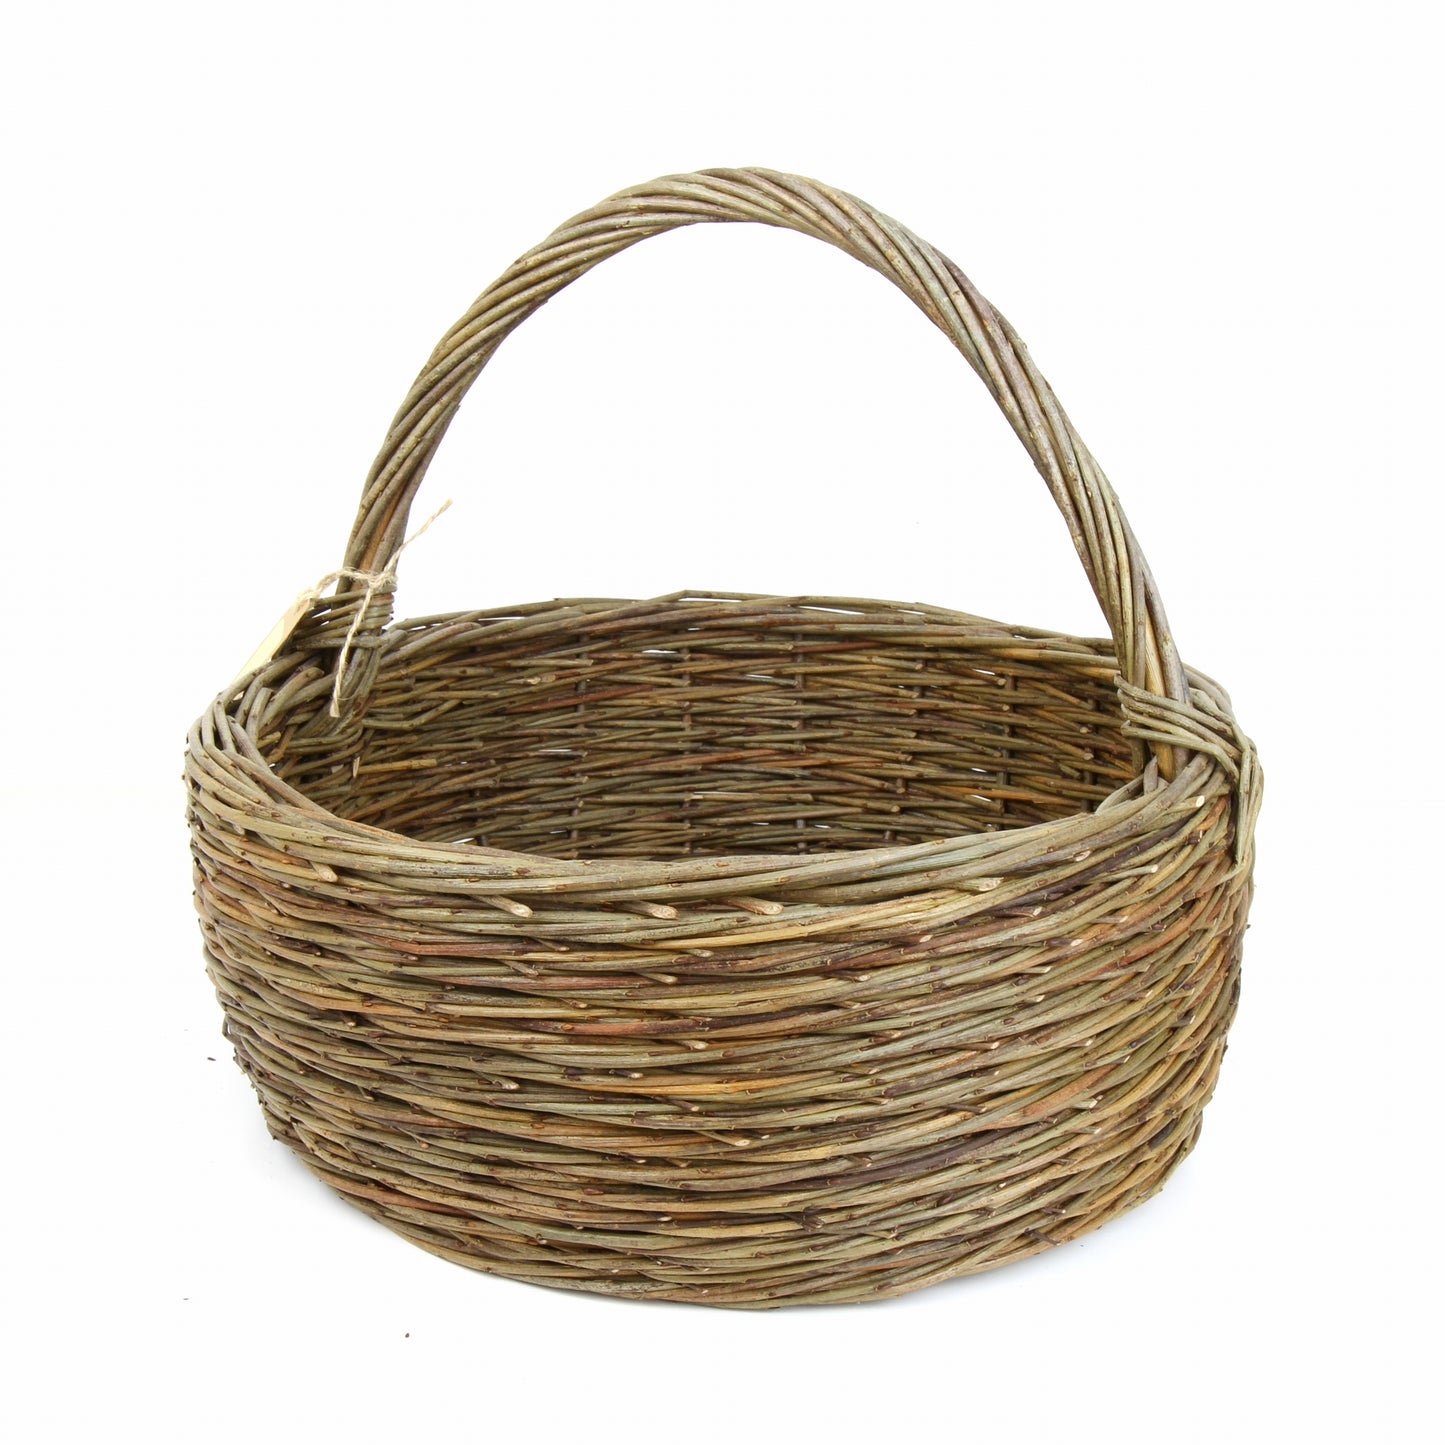 Willow Shopper Basket - Rope Coil